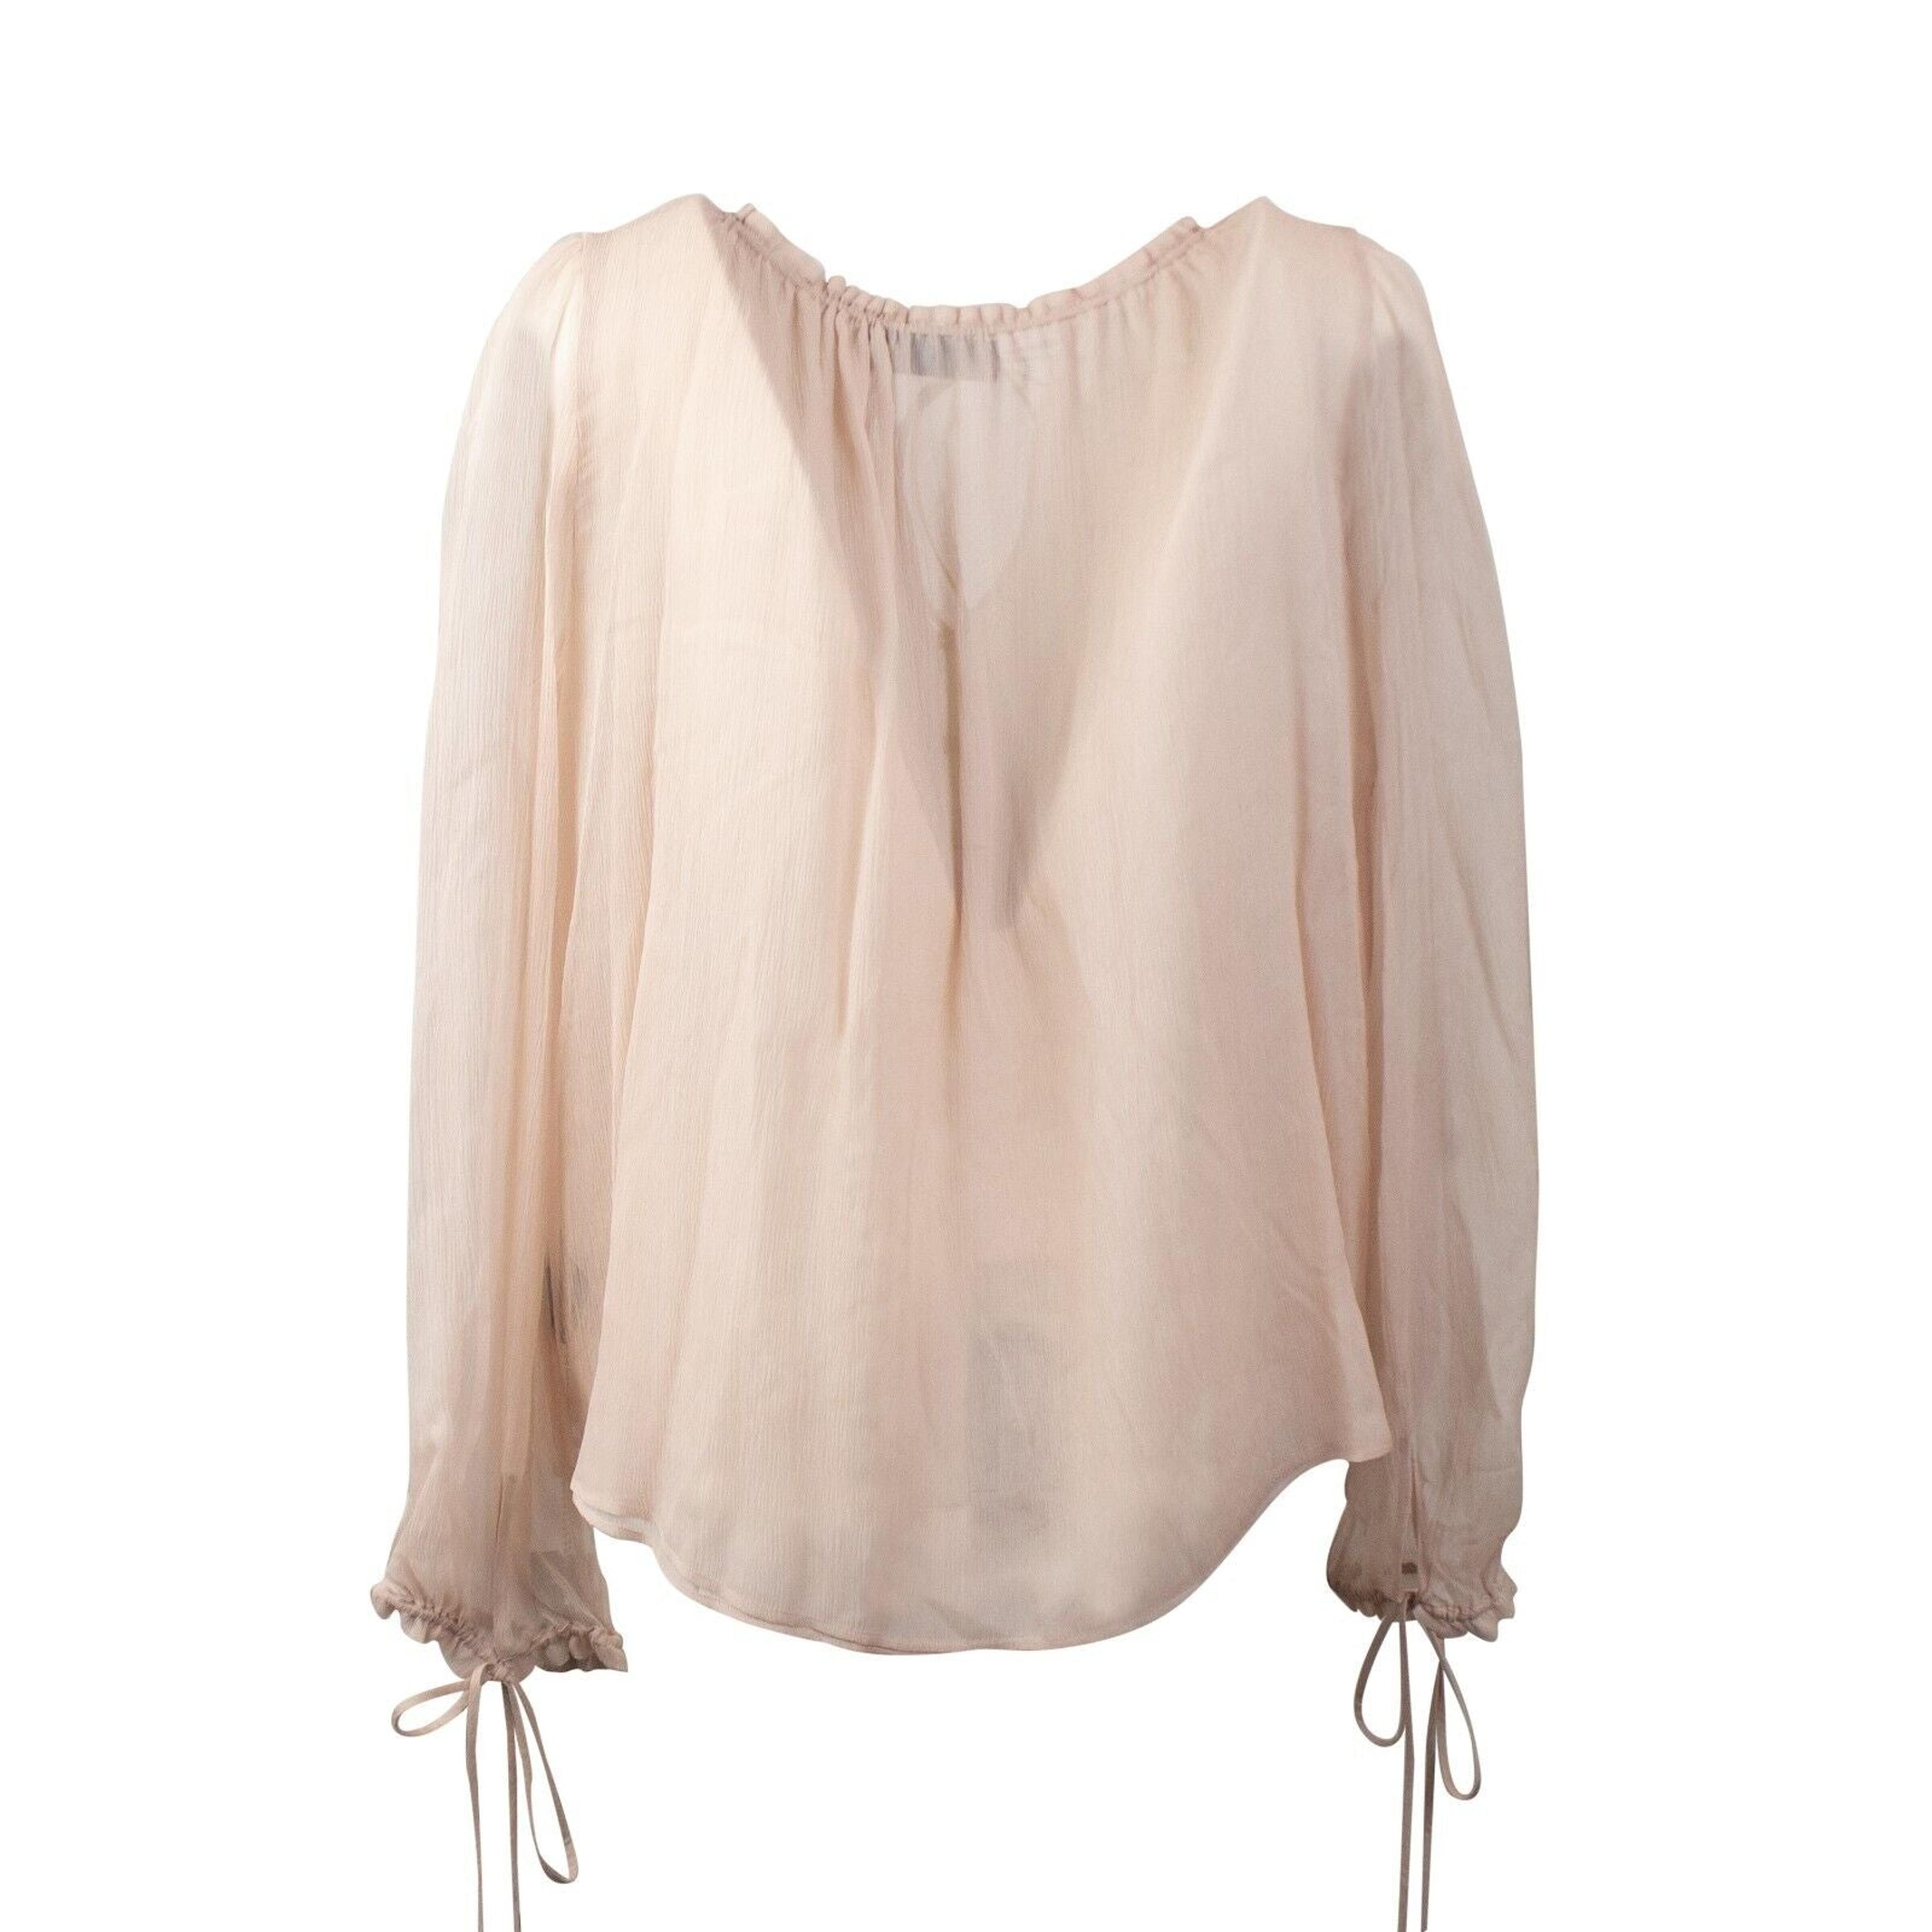 Alternate View 3 of Nude Crinkle Chiffon Blouse